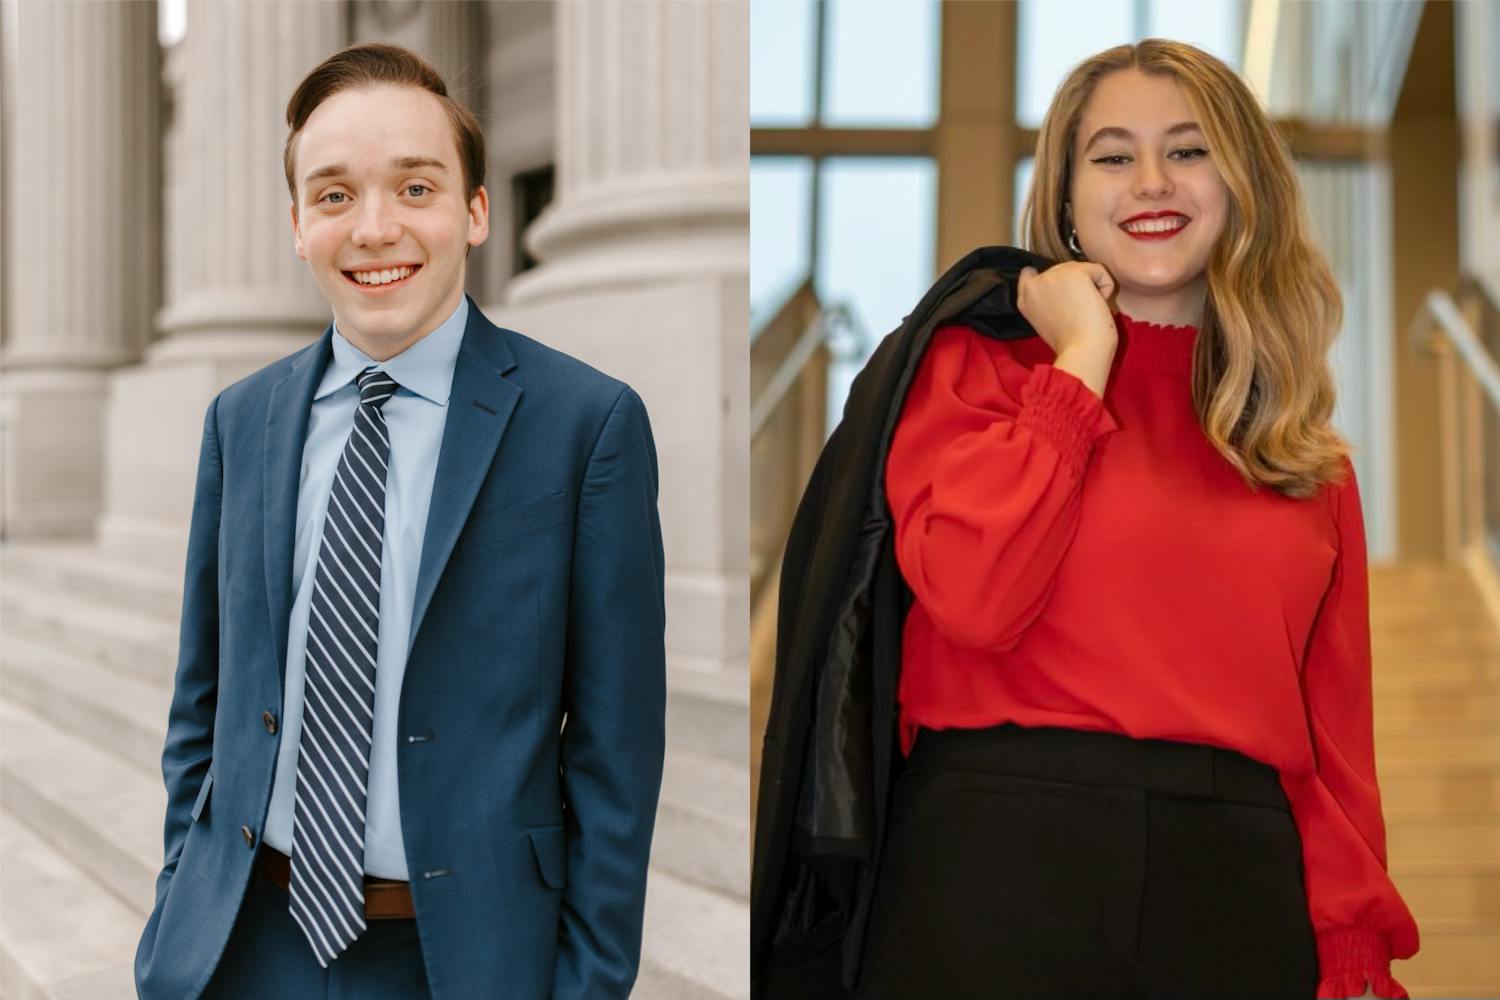 Cameron Eubanks (left) and Jordyn Vélez (right) are the candidates running to be the next speaker of the student senate. Students can vote for candidates from Feb. 21 at 9 a.m. to Feb. 22 at 5 p.m.&nbsp;